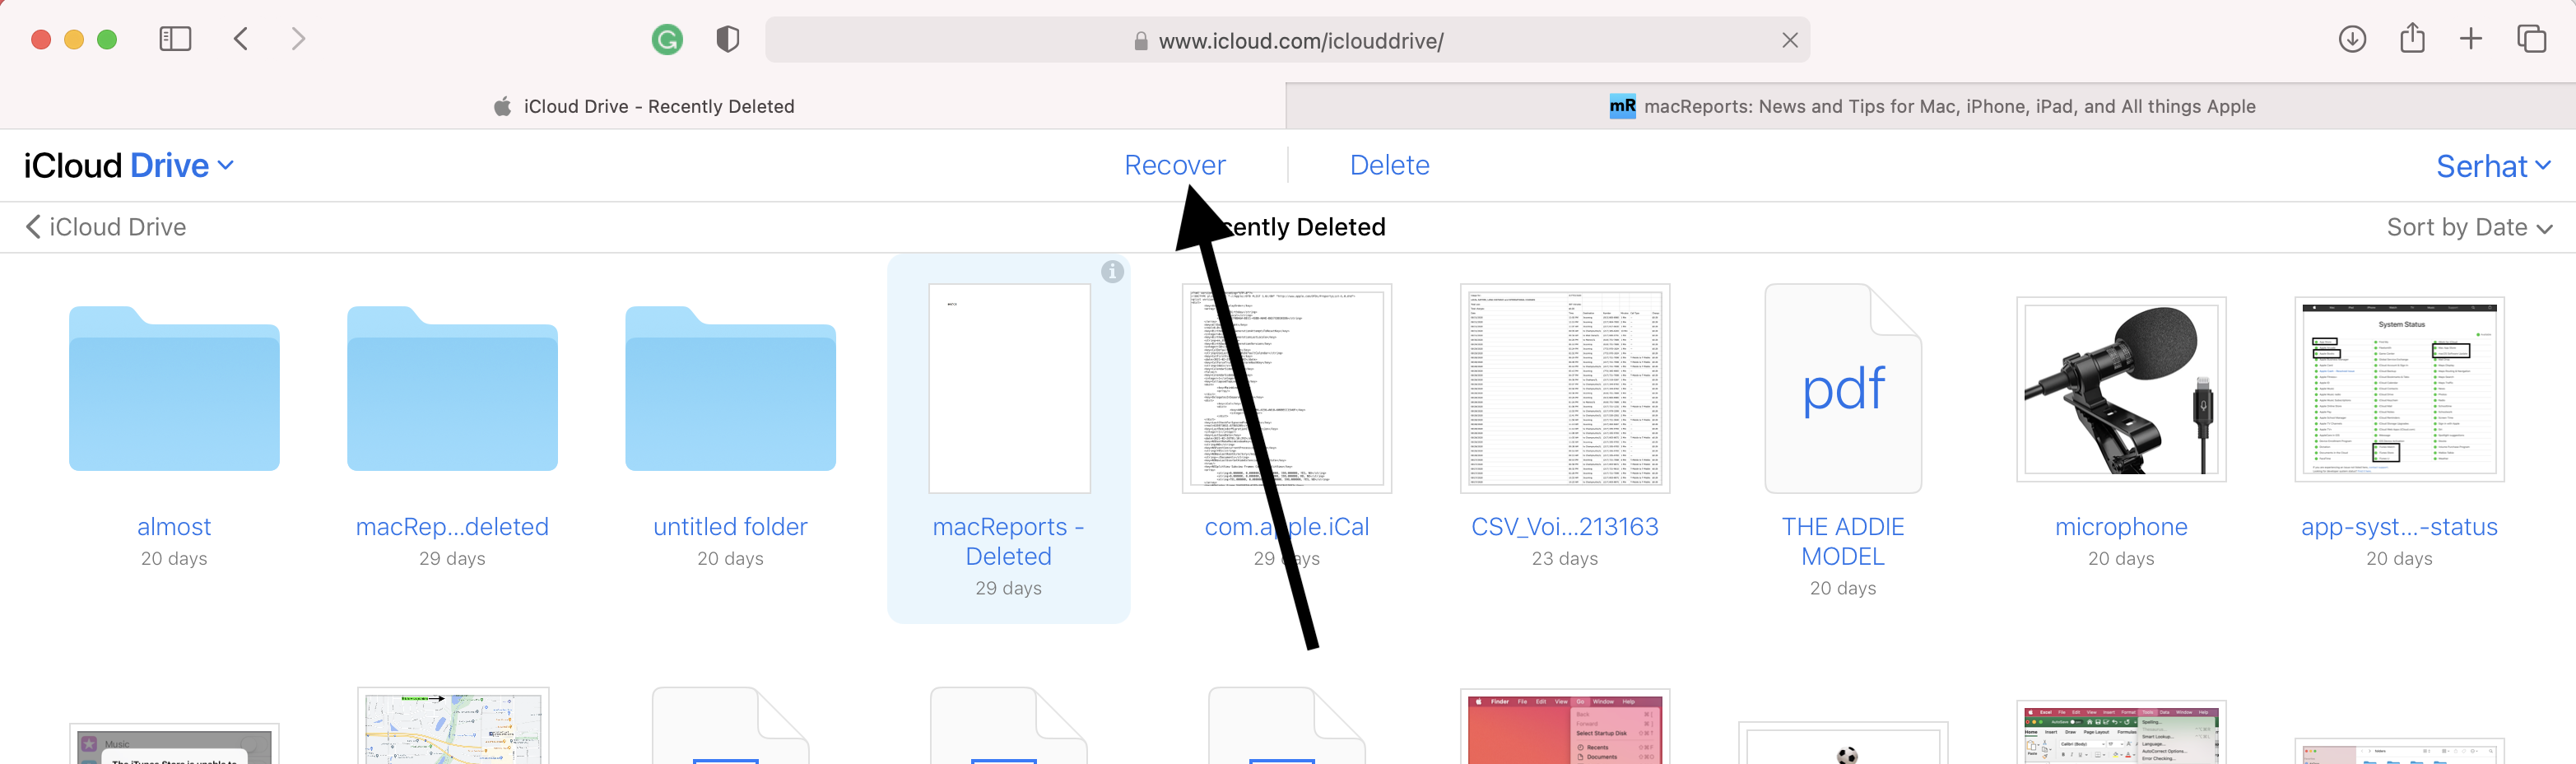 How to Recover Deleted iCloud Files on iPhone, iPad, Mac, and iCloud